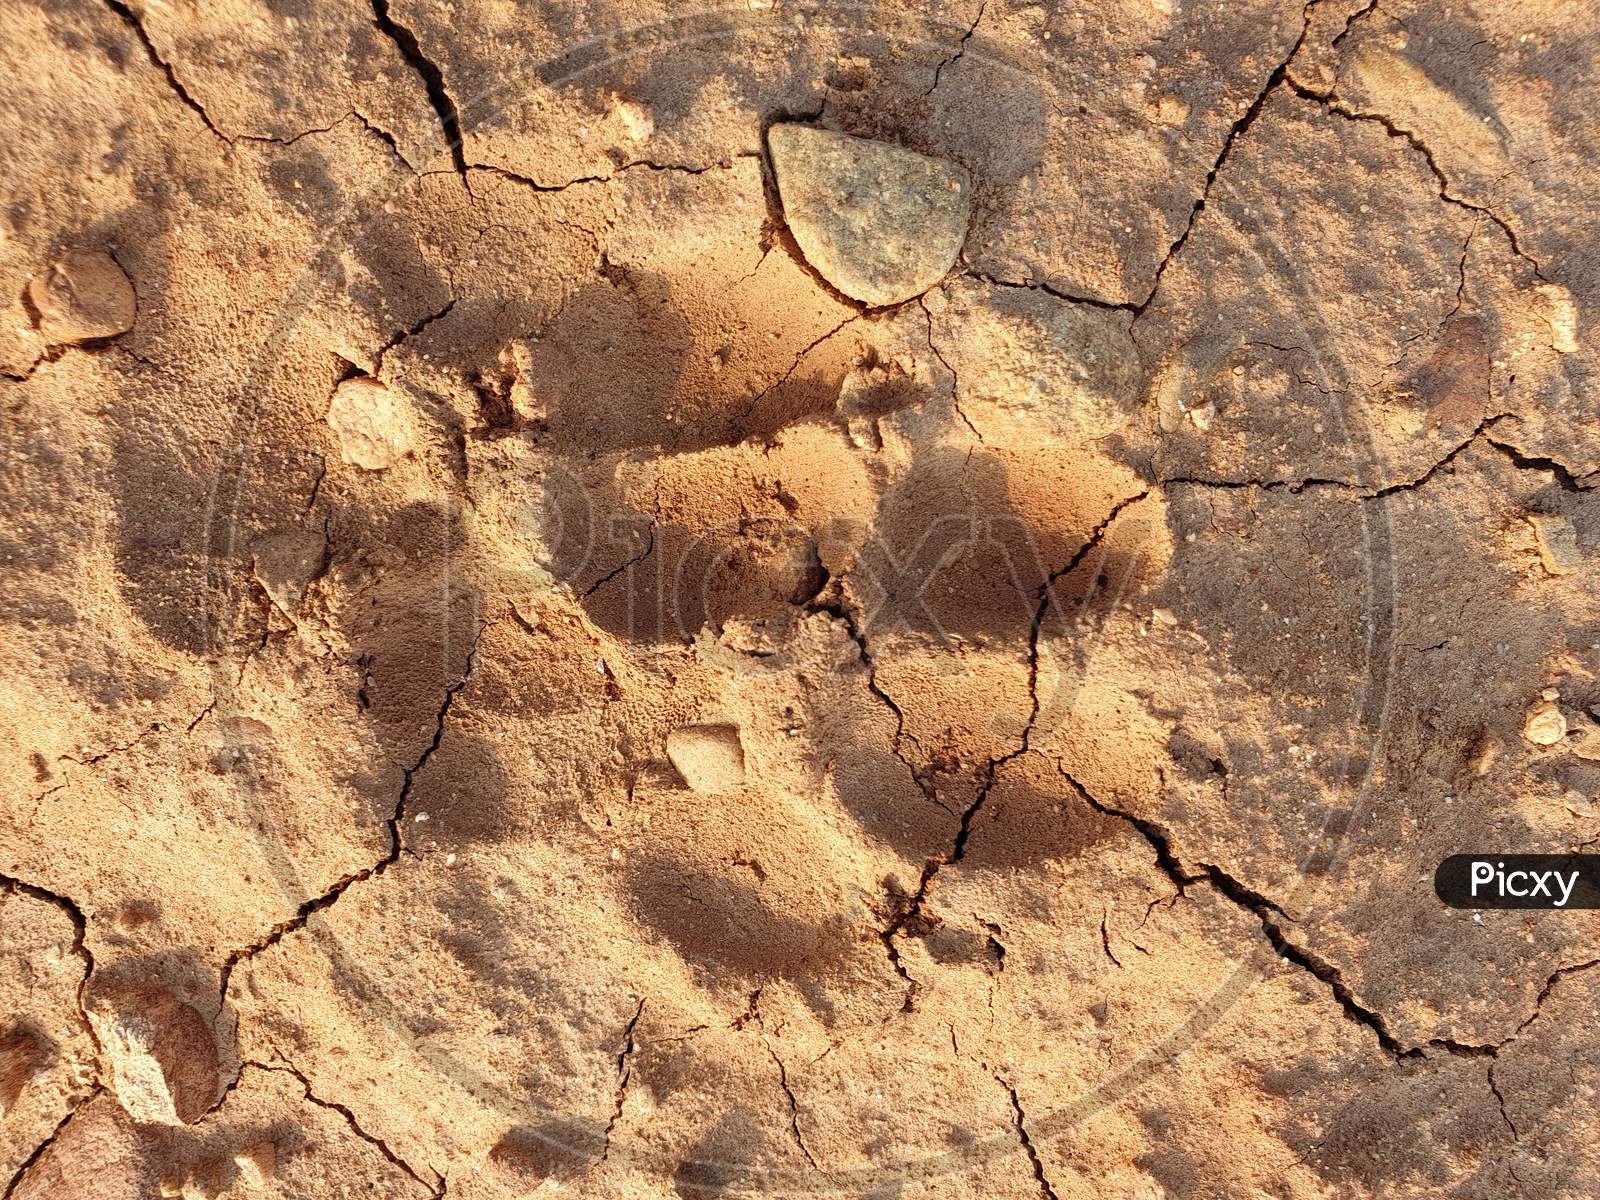 Foot Prints Of Dog On Cracked Mud